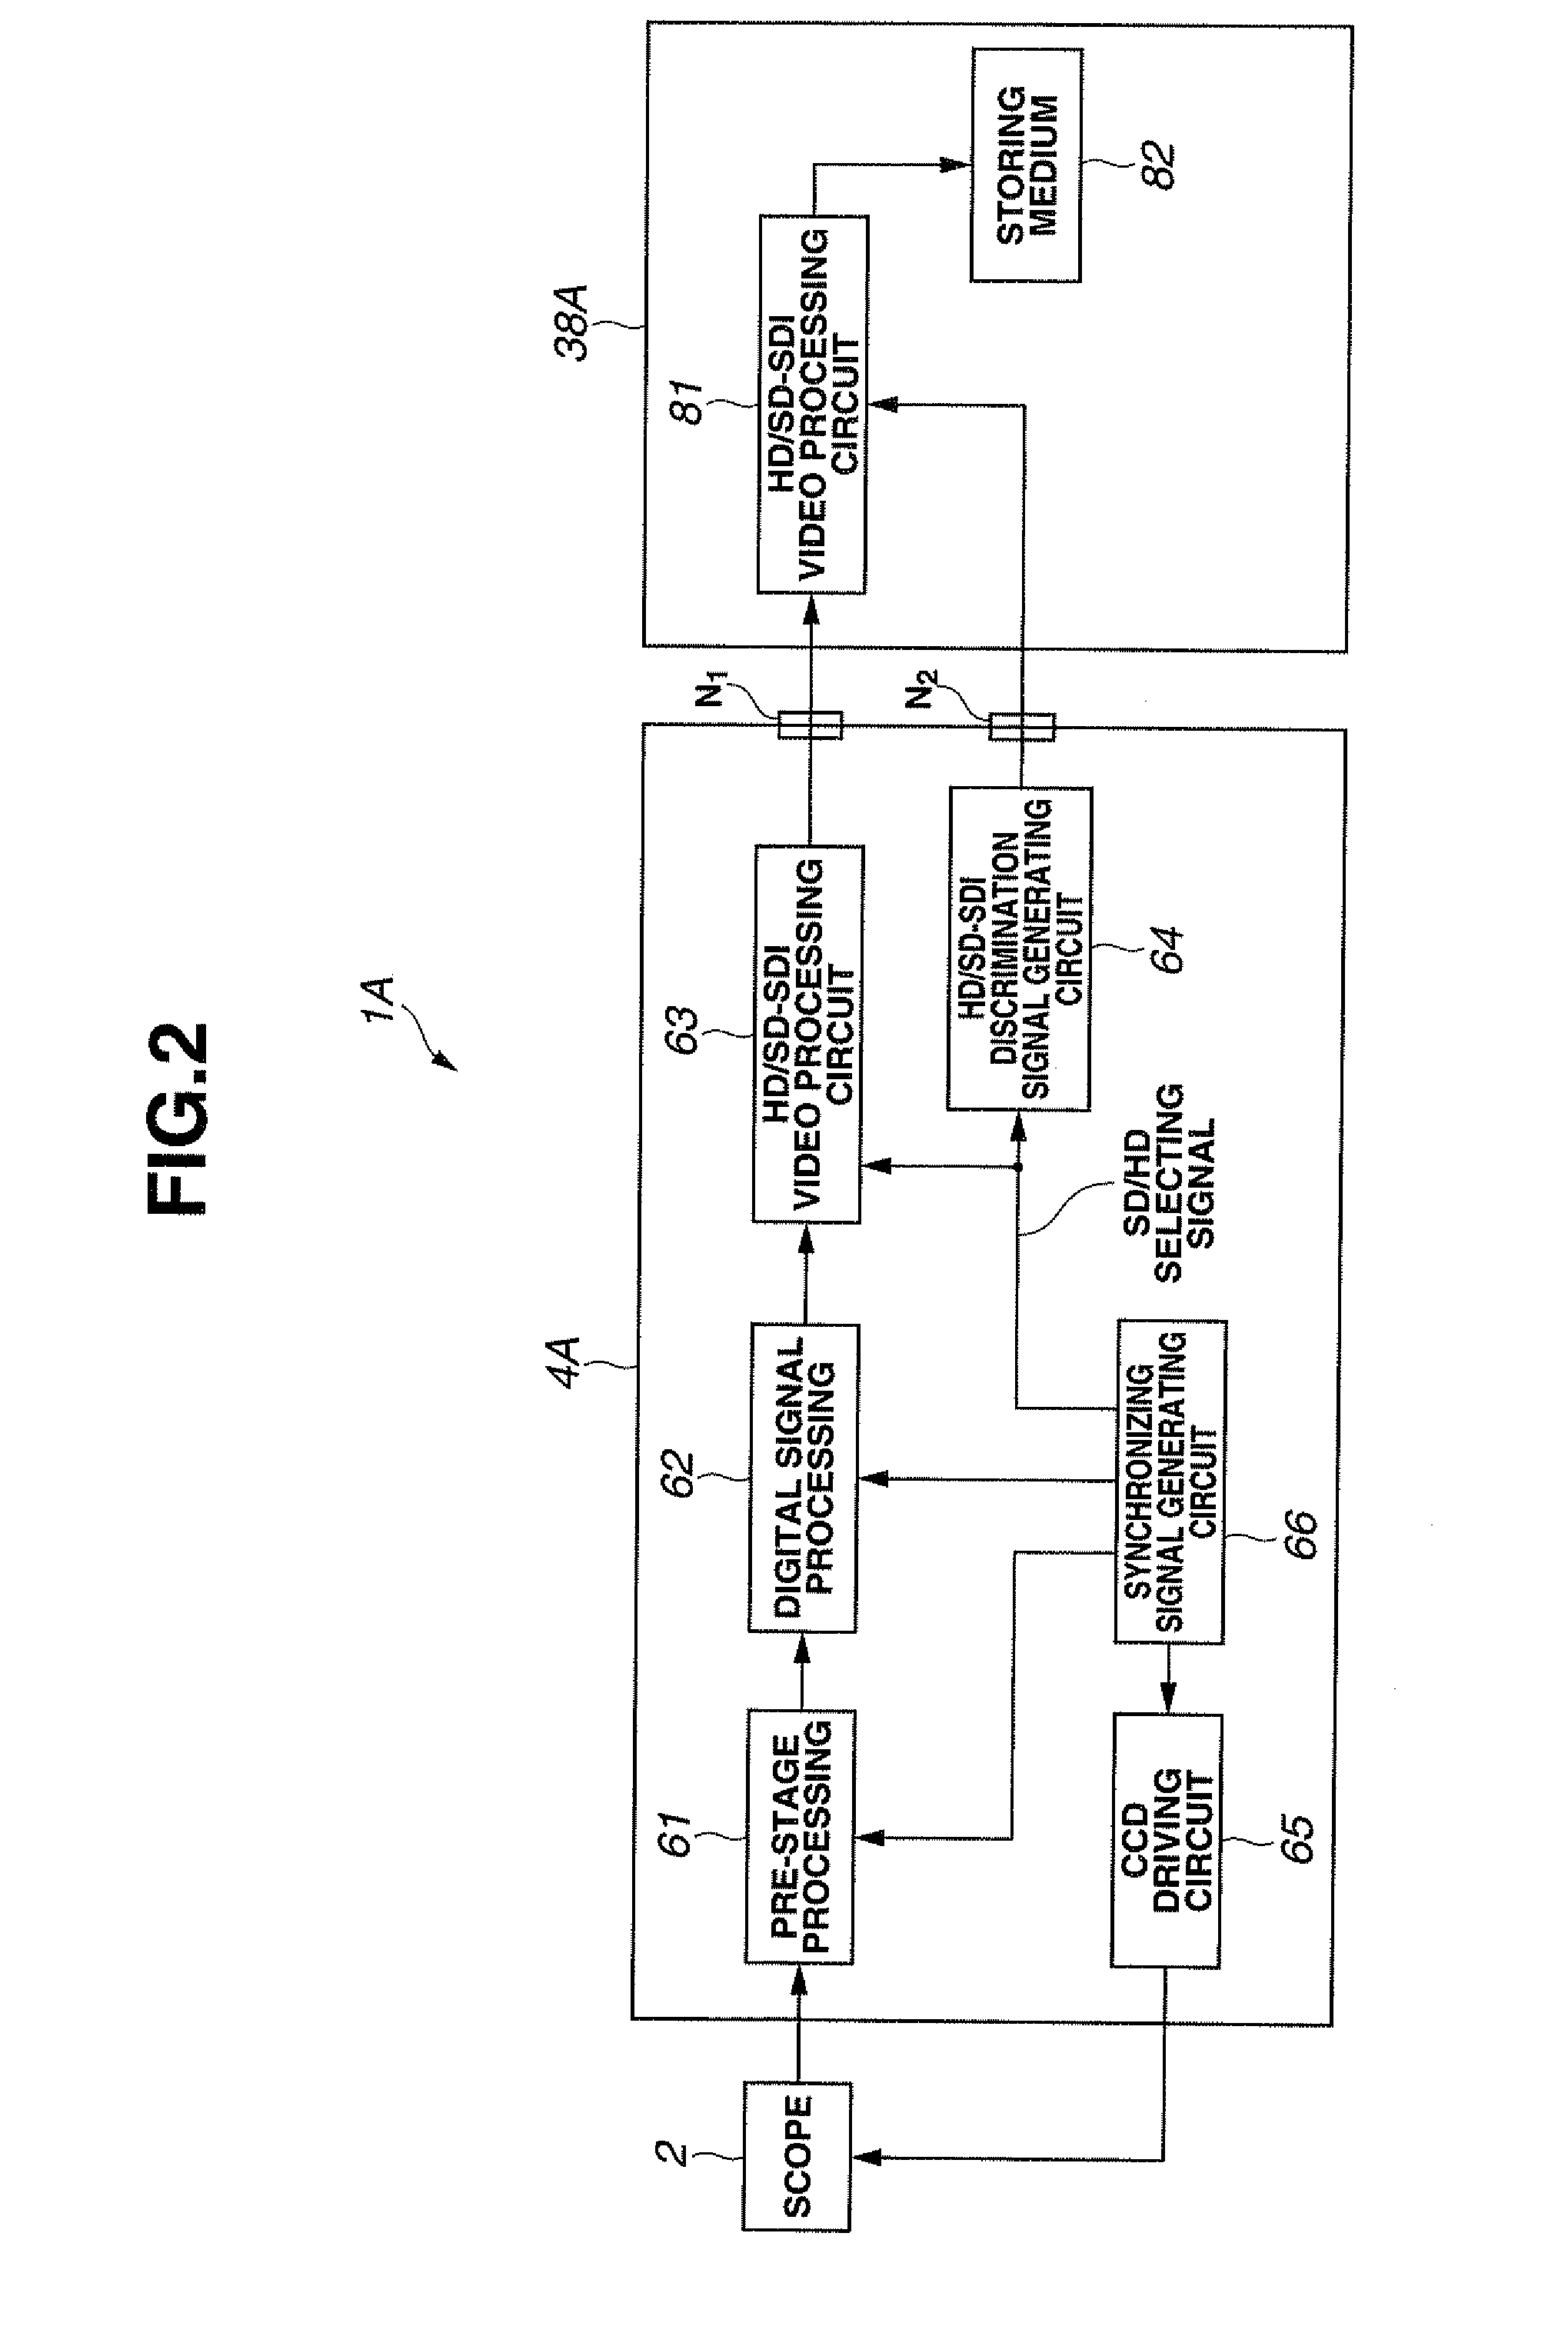 Image processing apparatus for endoscope